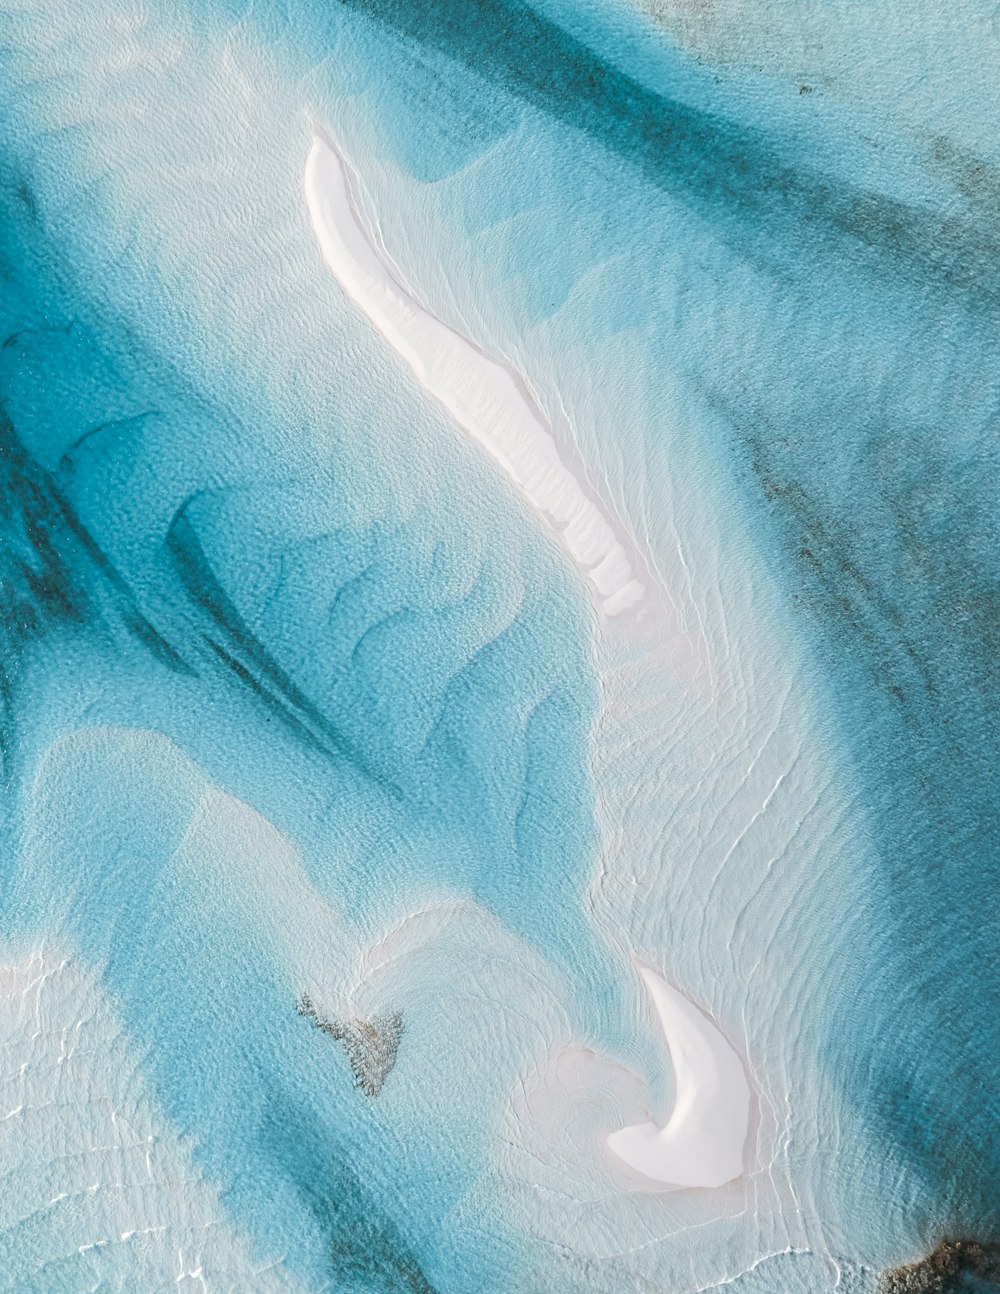 a bird's eye view of the water and sand